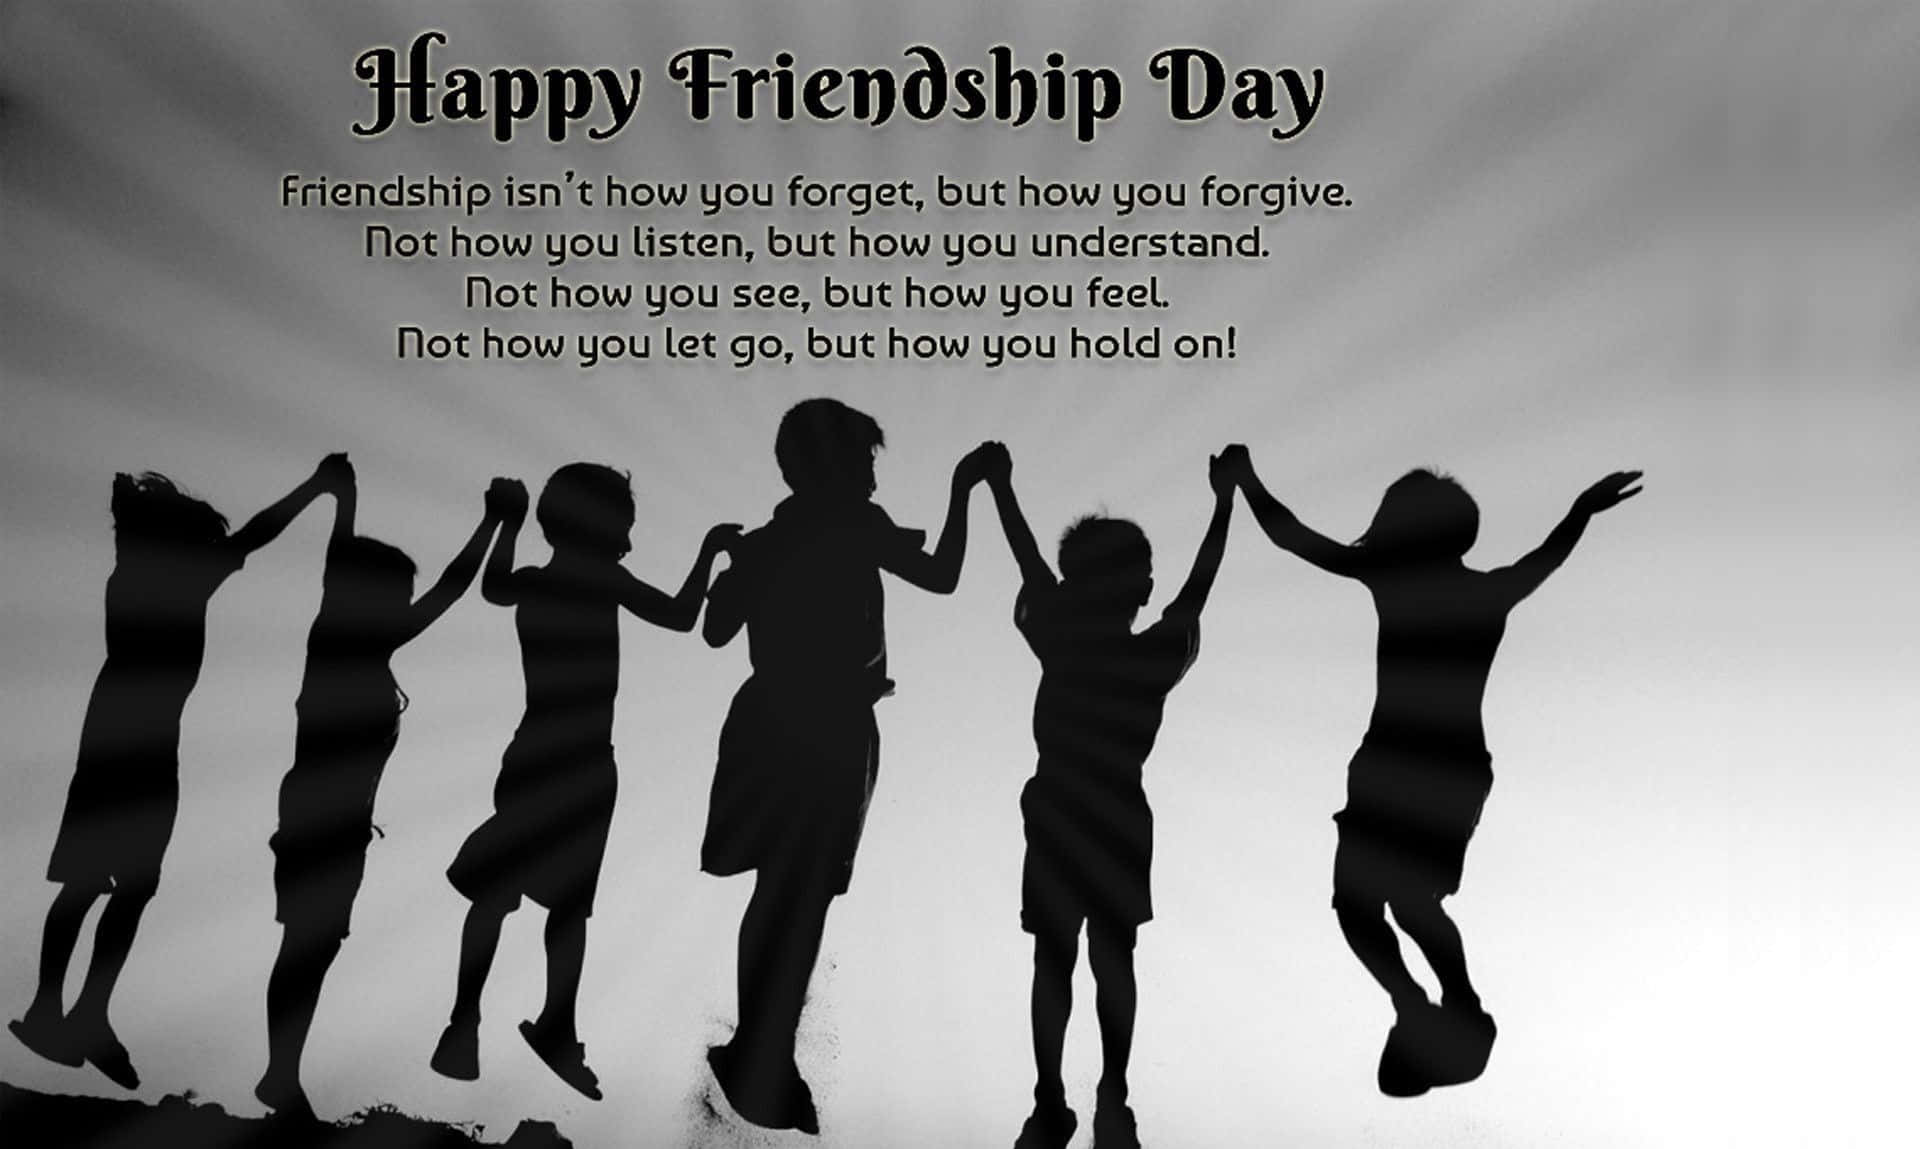 Celebrate Friendship Day in style with friends!